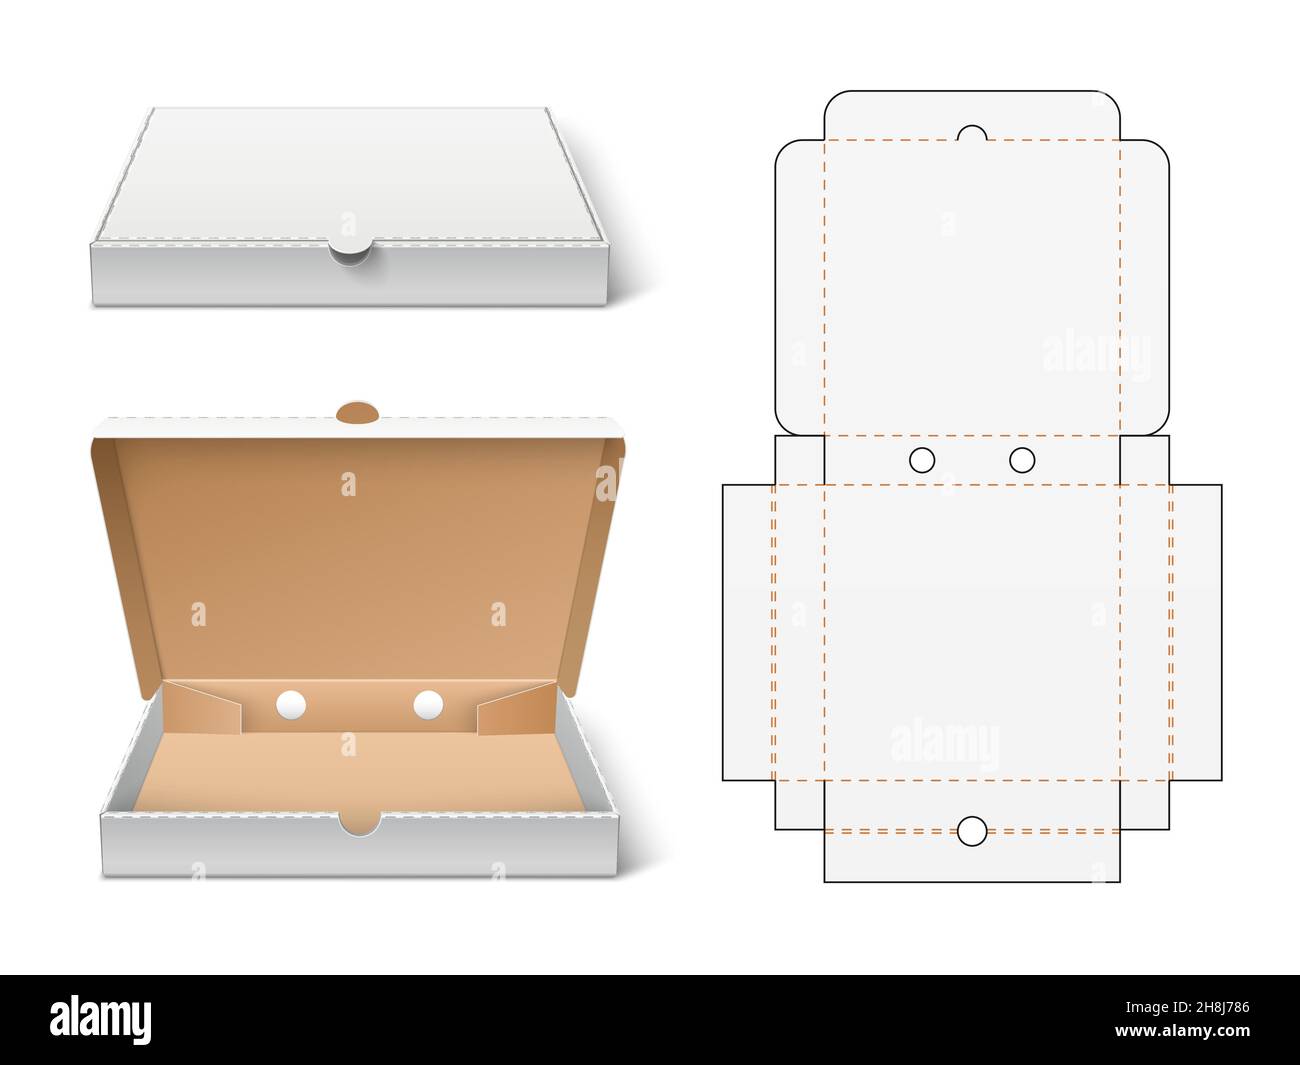 Unwrapped pizza box. Realistic 3d white cardboard fast food packaging mockup, open and closed view, container cutting scheme. Vector concept Stock Vector